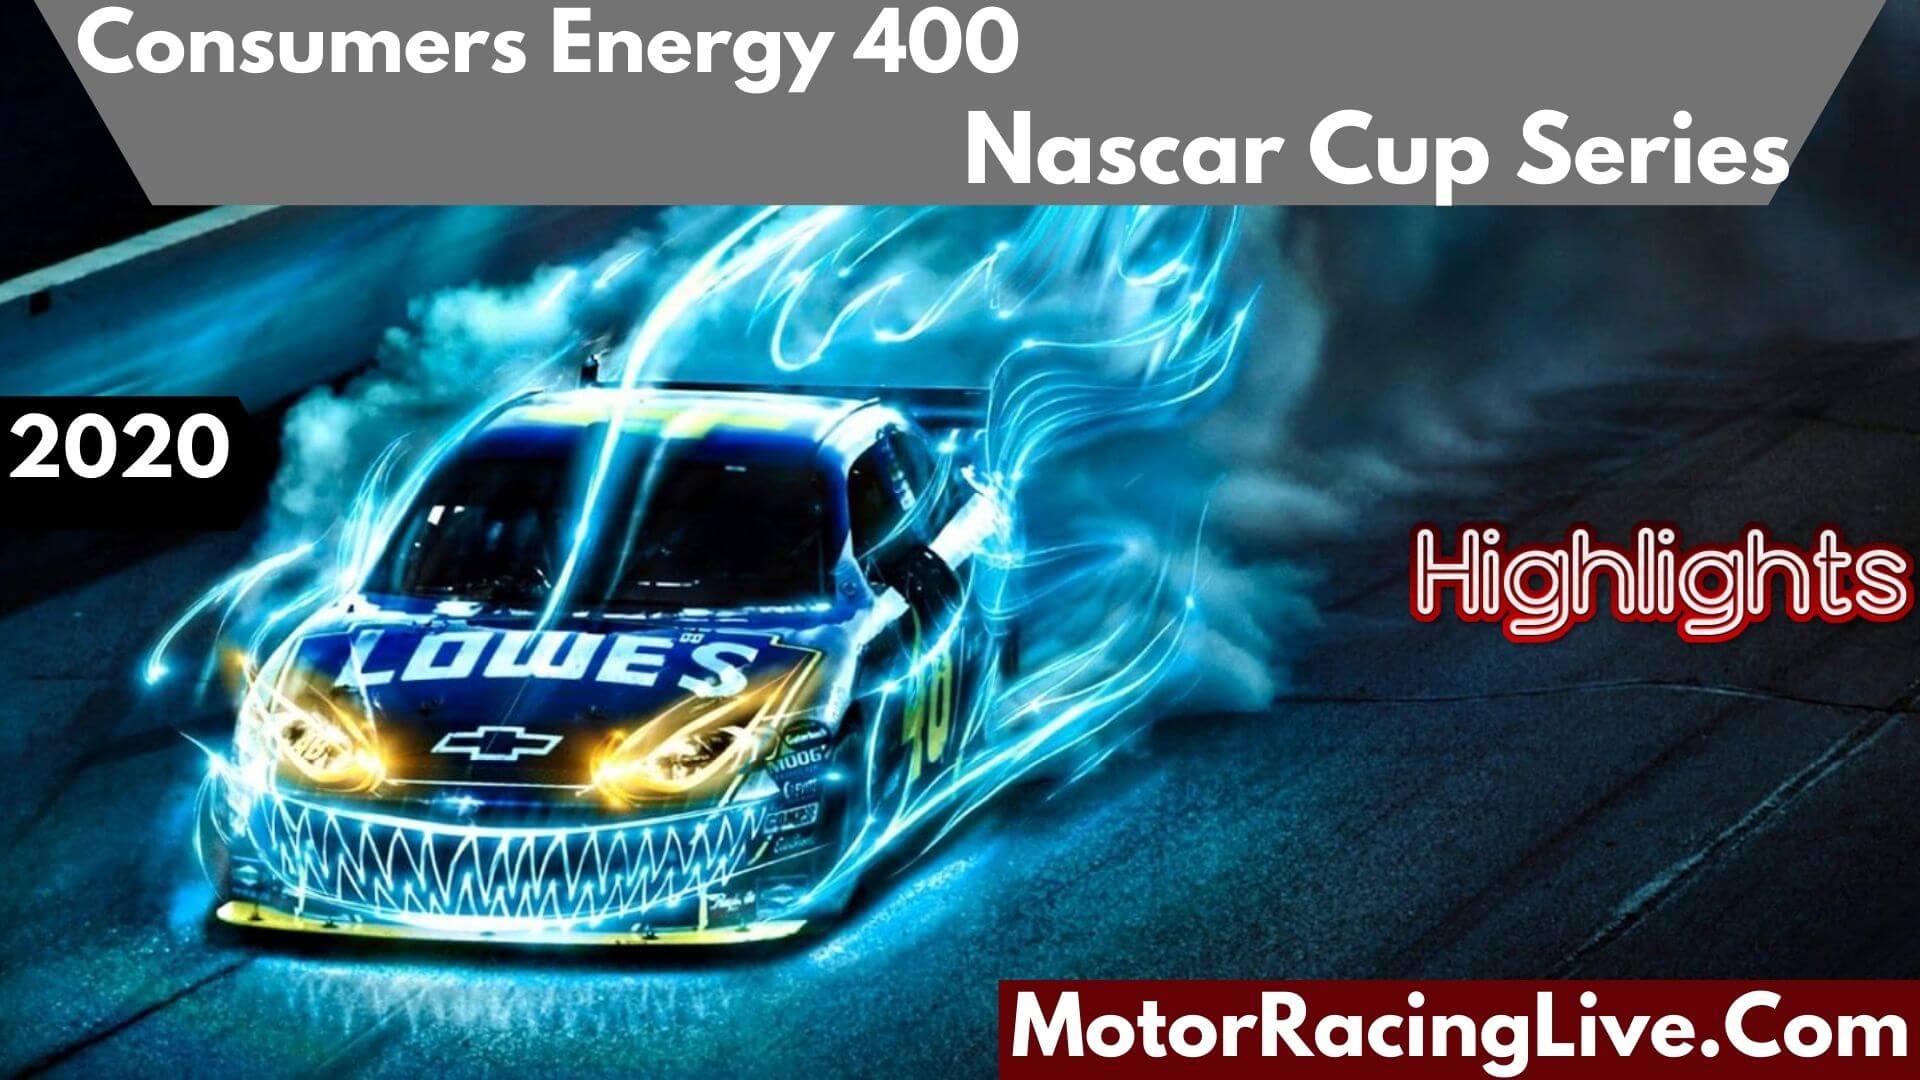 Consumers Energy 400 Highlights Nascar Cup Series 2020